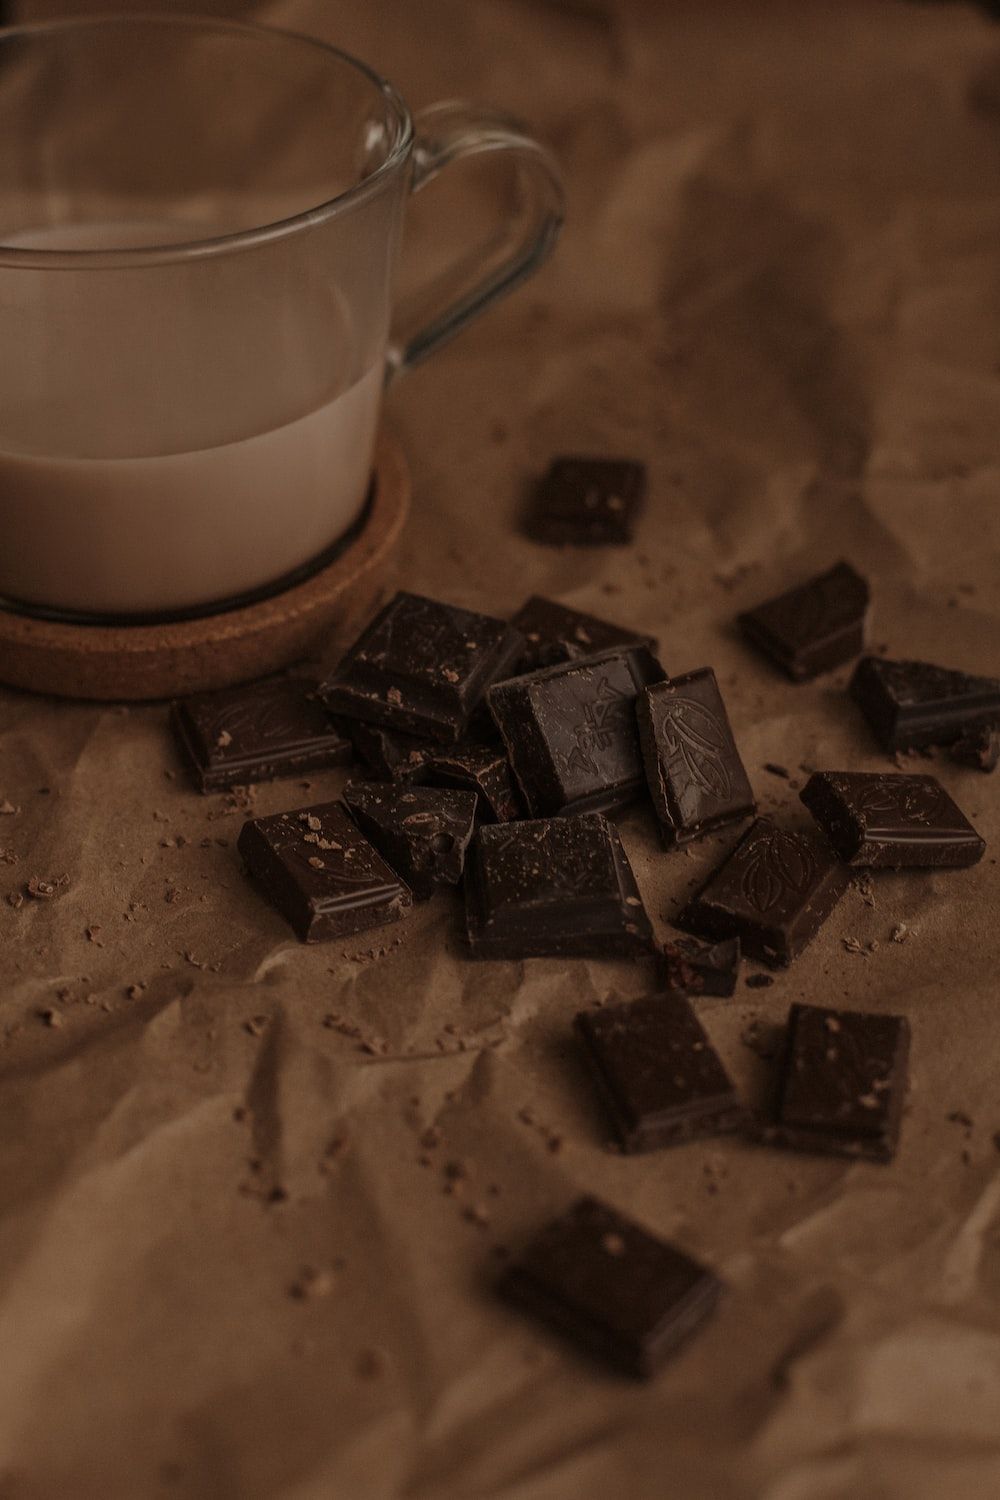 A cup of coffee and some chocolate on the table - Chocolate